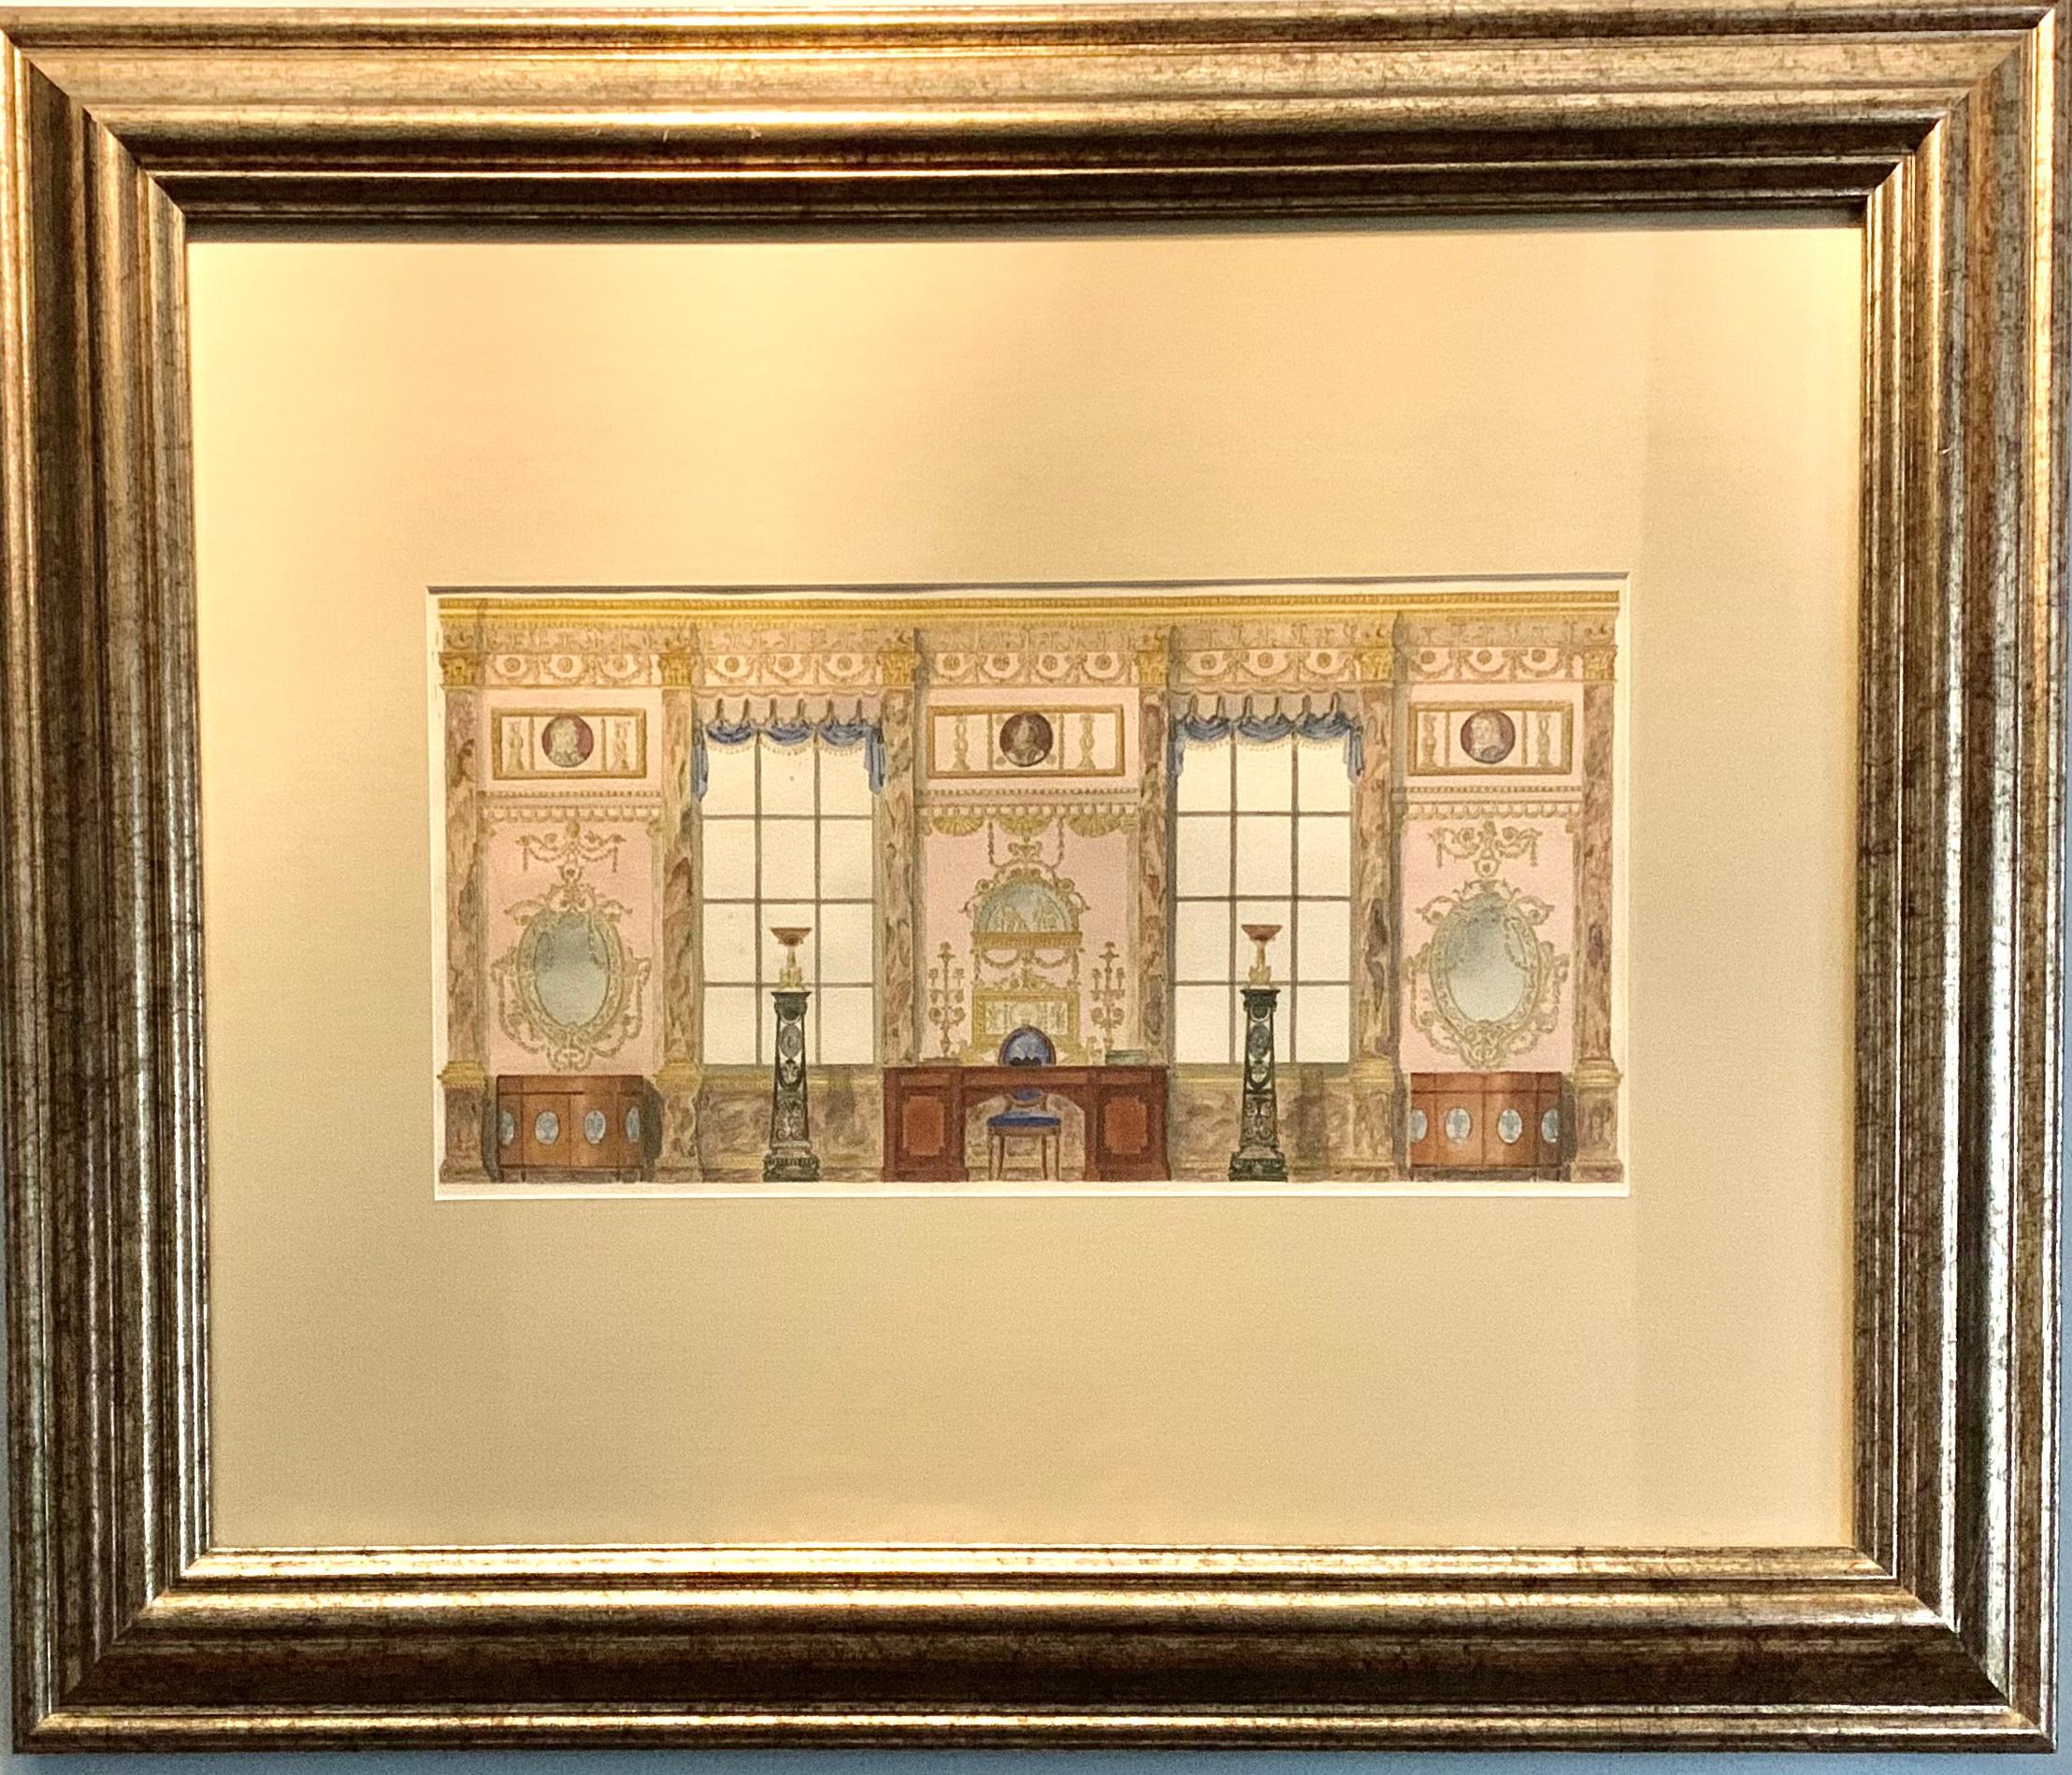 19th Century Fine Antique English Watercolor Painting, Adam Style Palace Interior Rendering For Sale